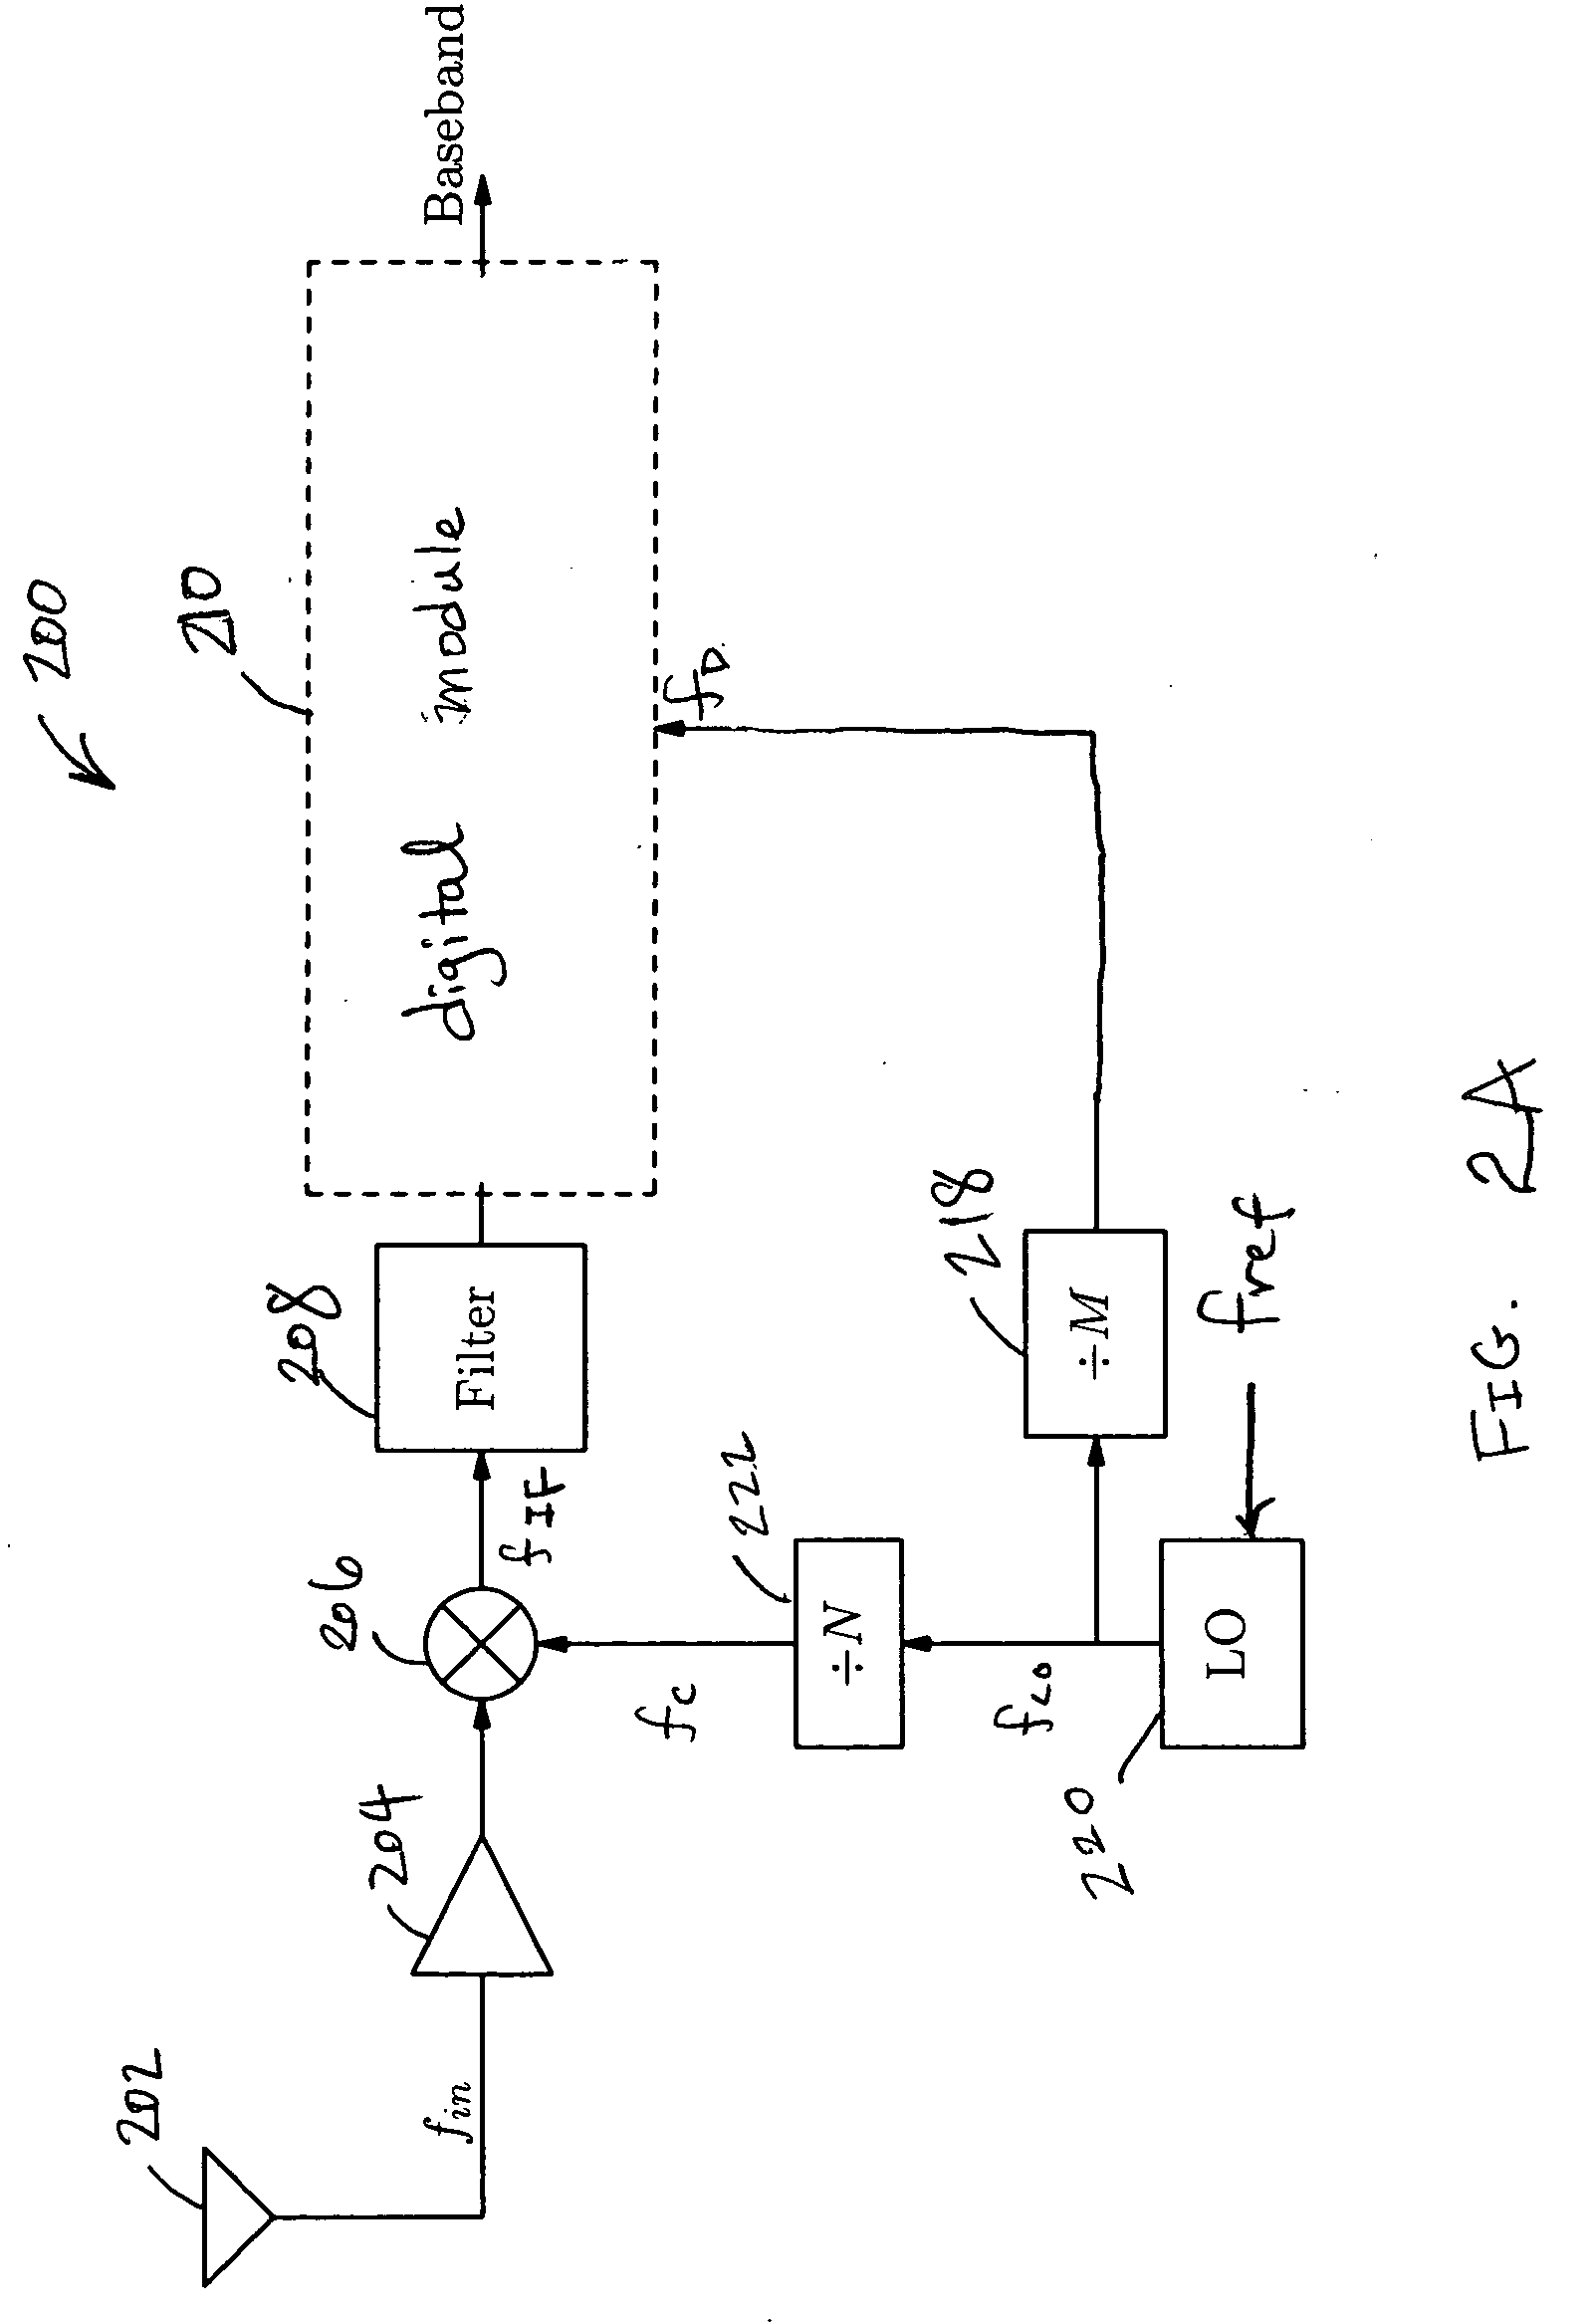 Digital noise coupling reduction and variable intermediate frequency generation in mixed signal circuits